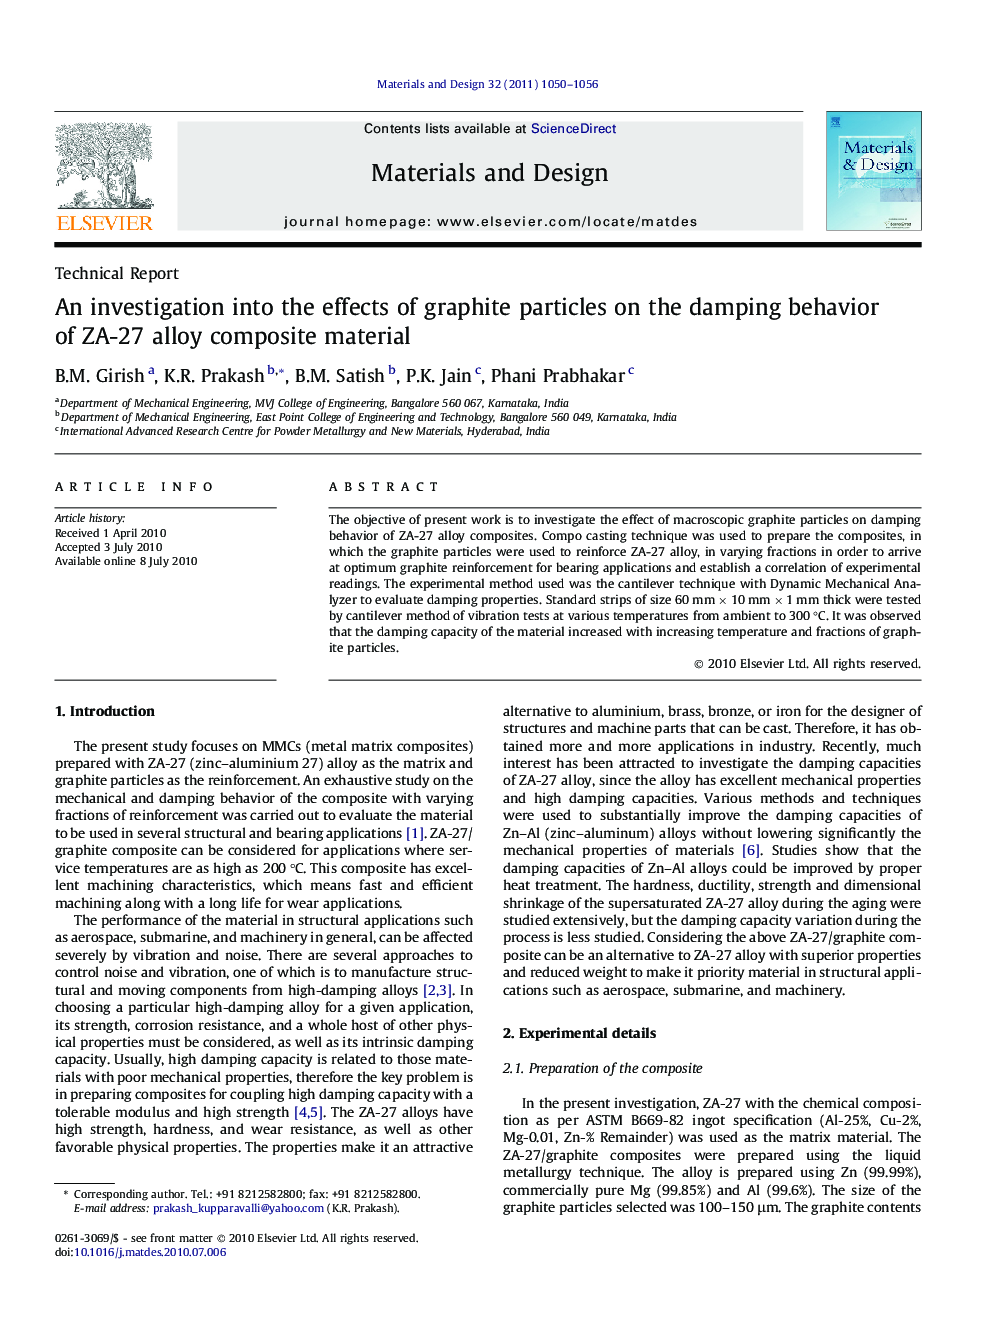 An investigation into the effects of graphite particles on the damping behavior of ZA-27 alloy composite material